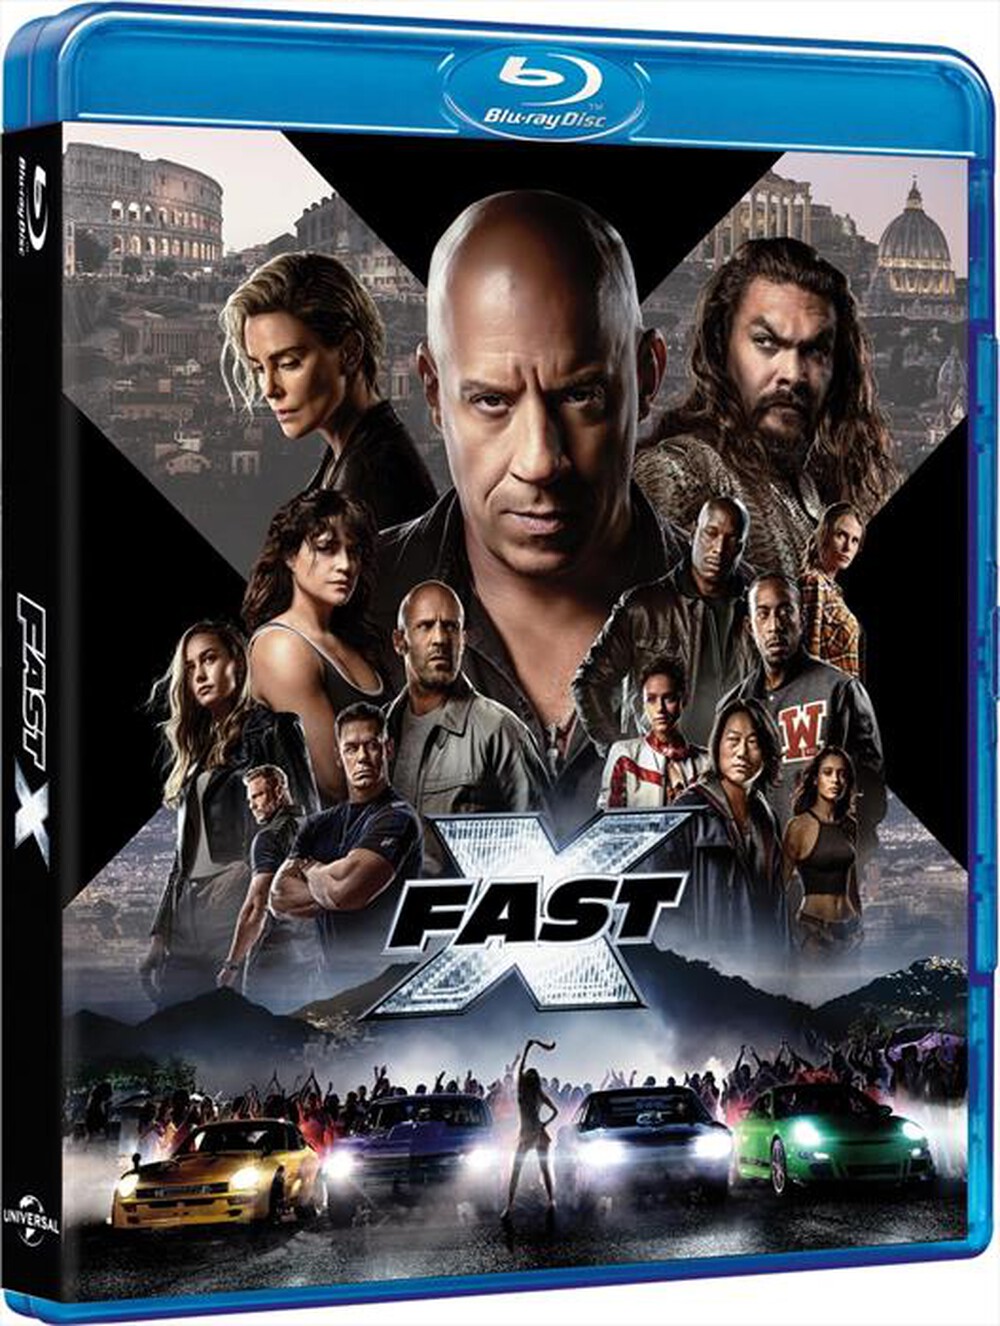 "UNIVERSAL PICTURES - Fast X"